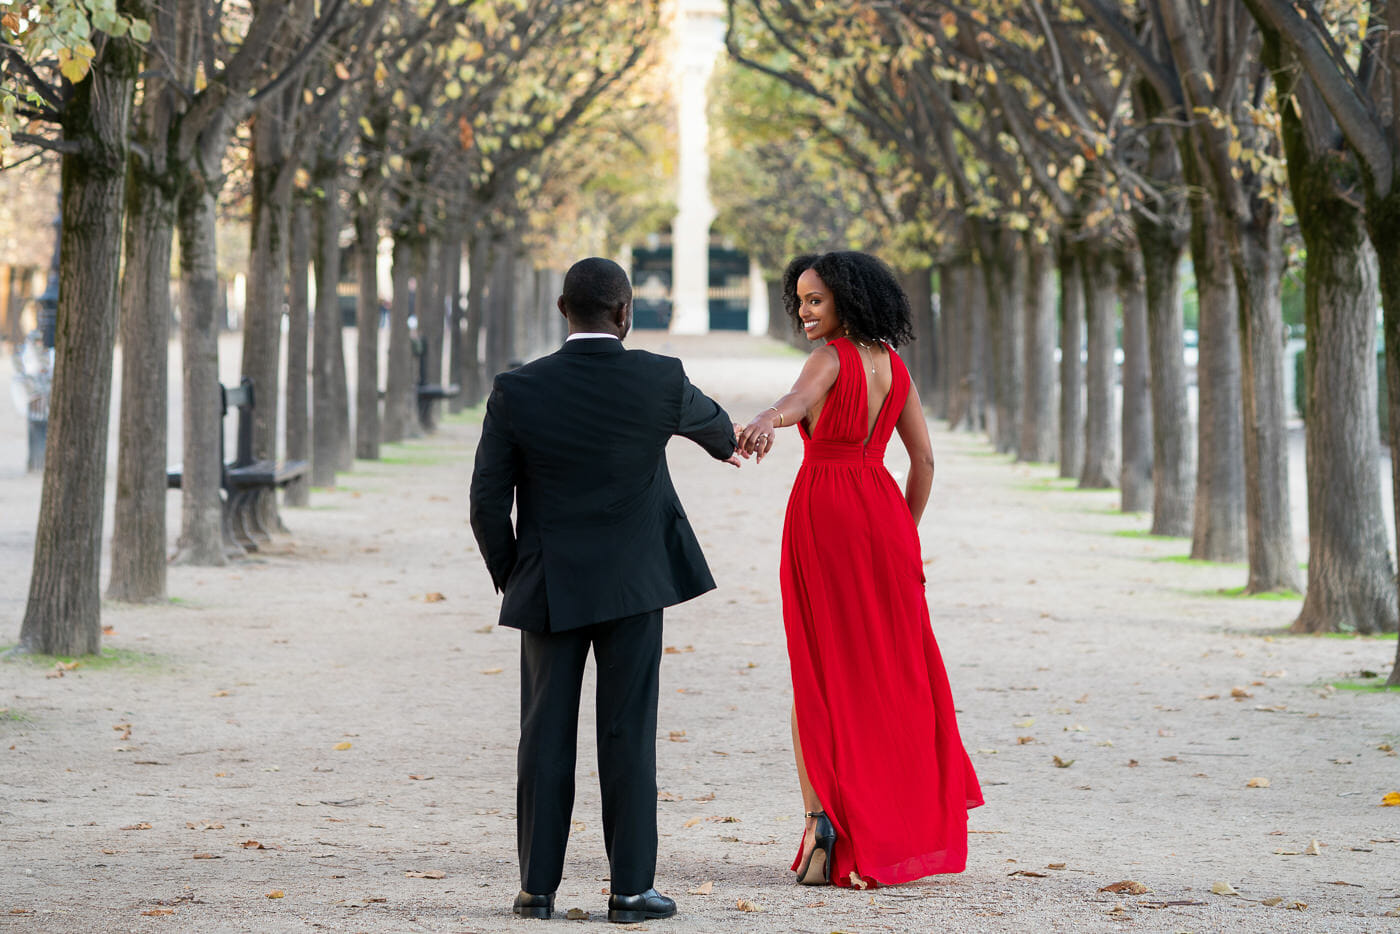 Cute ideas for couple photoshoot poses in Paris